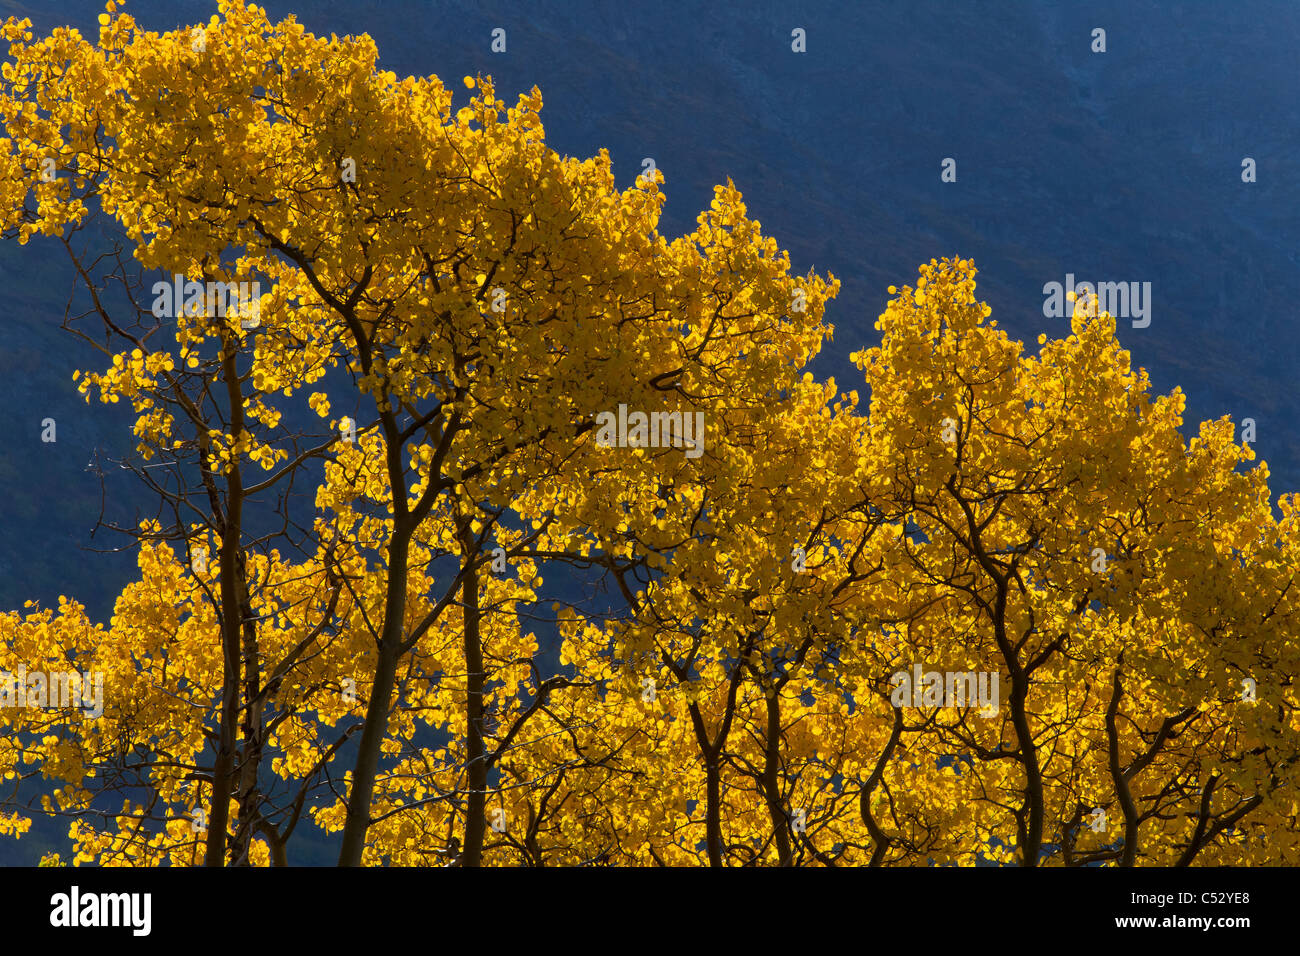 View of scenery and yellow Aspen trees along the Alaska Highway between Haines and Haines Junction, Yukon Territory, Canada Stock Photo